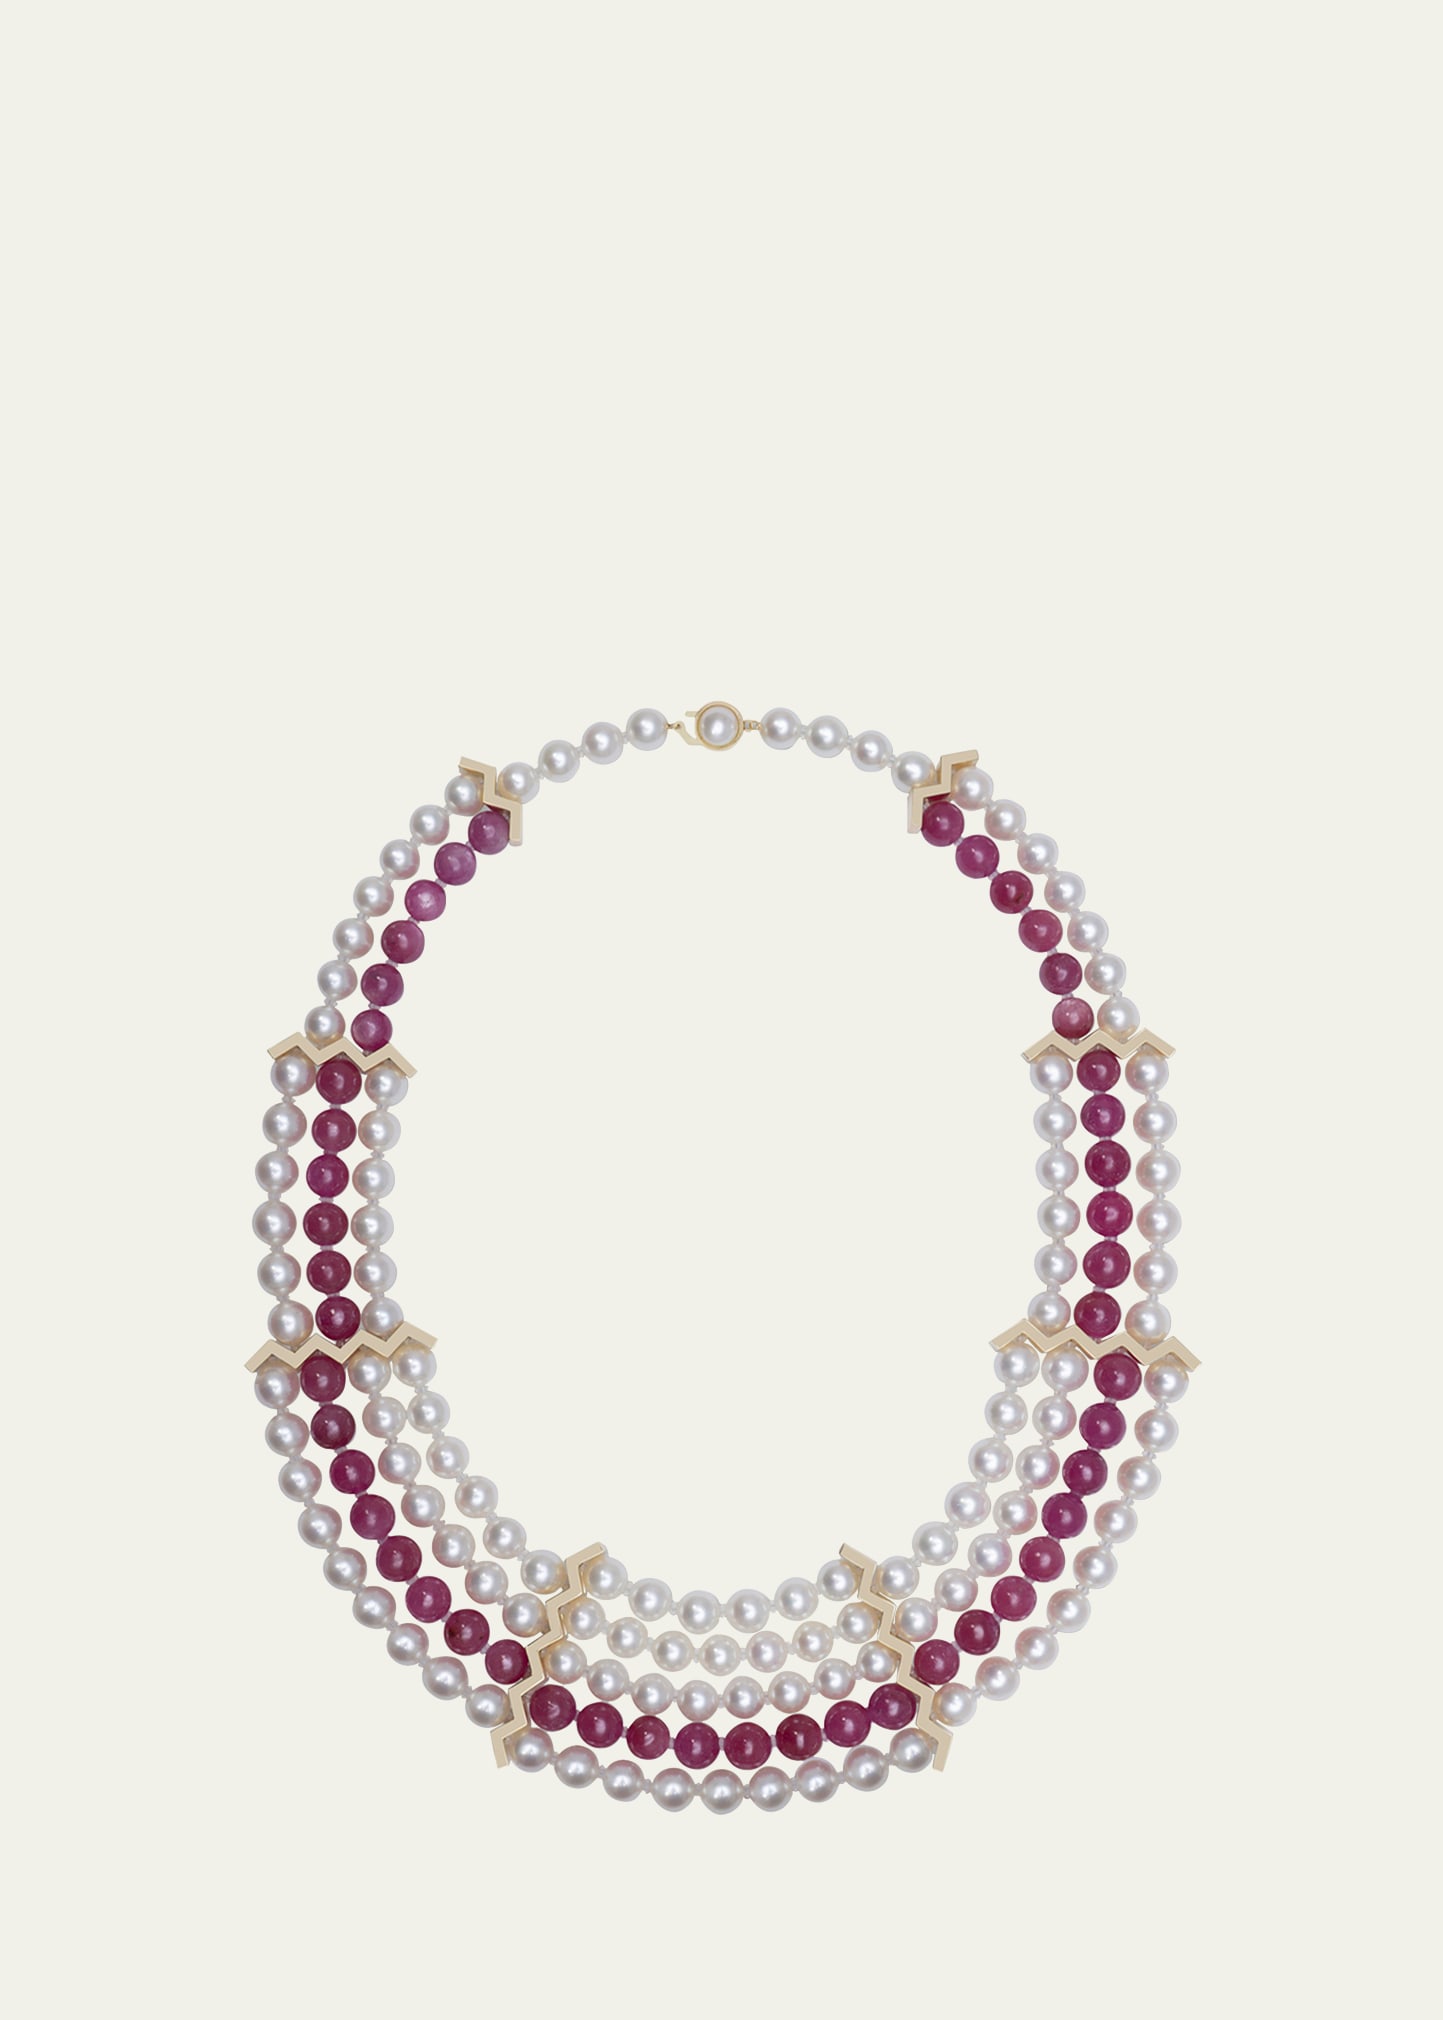 Modular Necklace in Pink Sapphire and Akoya Pearls